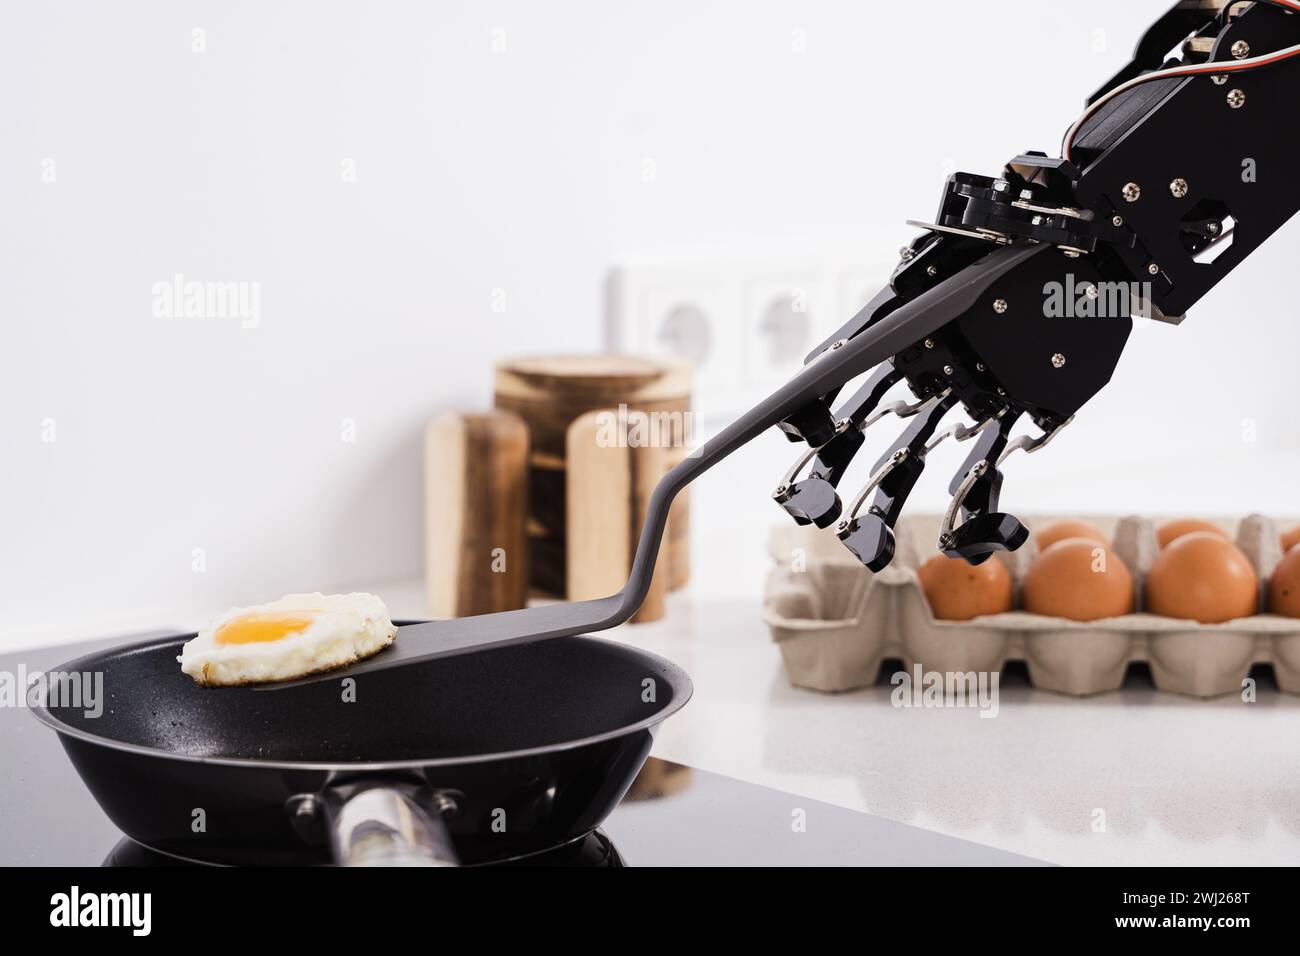 Real robot hand and frying pan with fried egg. Concepts of AI development and robotic process automation Stock Photo